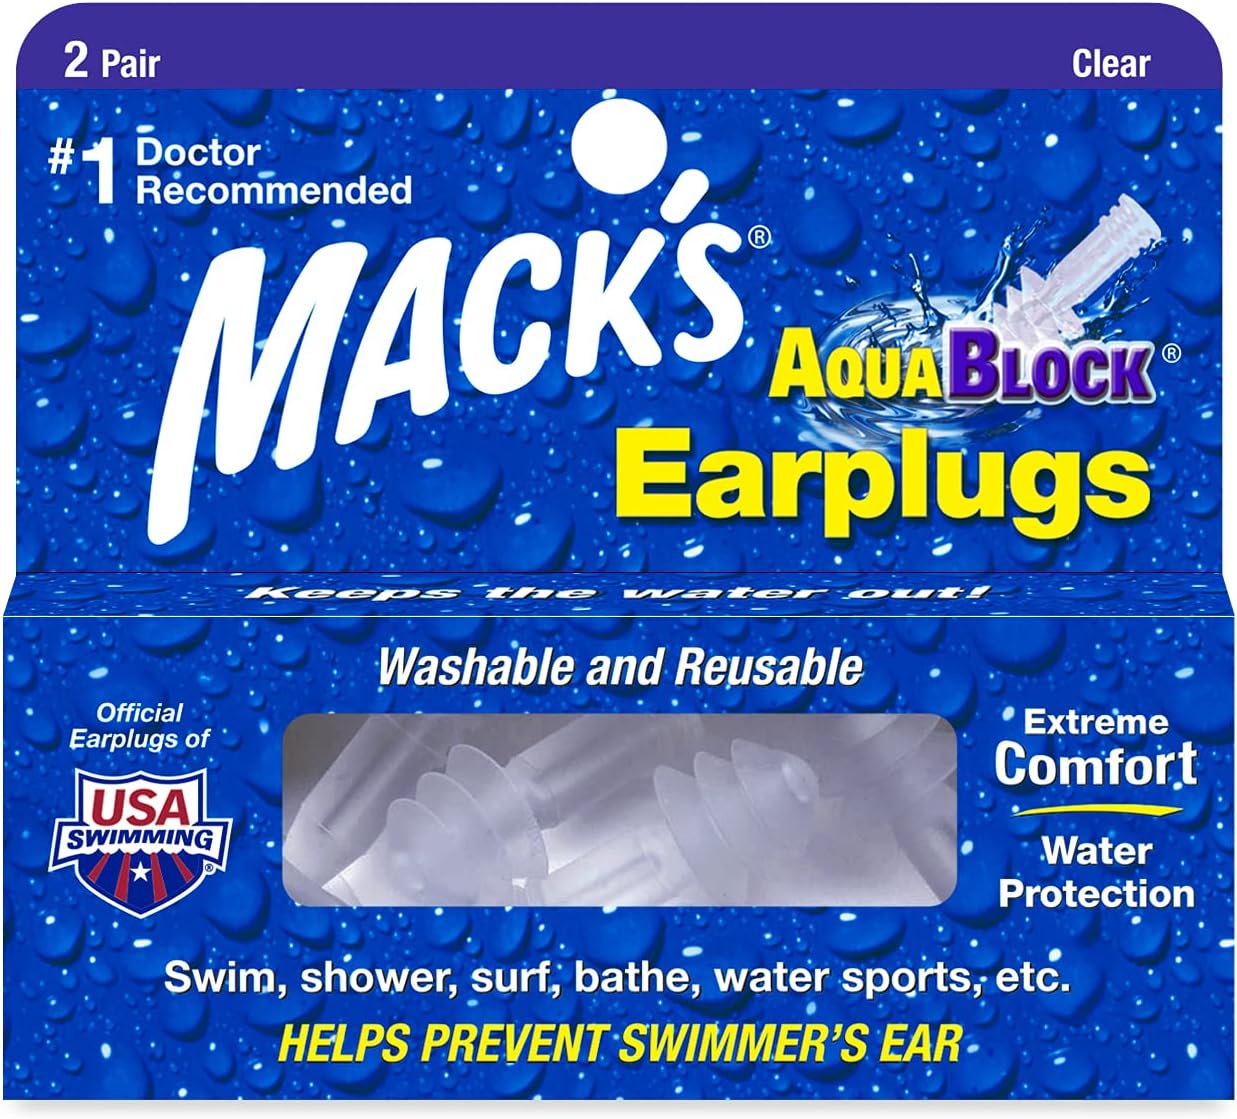 Mack's AquaBlock Swimming Earplugs, 2 Pair - Comfortable, Waterproof, Reusable Silicone Ear Plugs for Swimming, Snorkeling, Showering, Surfing and Bathing (Clear)